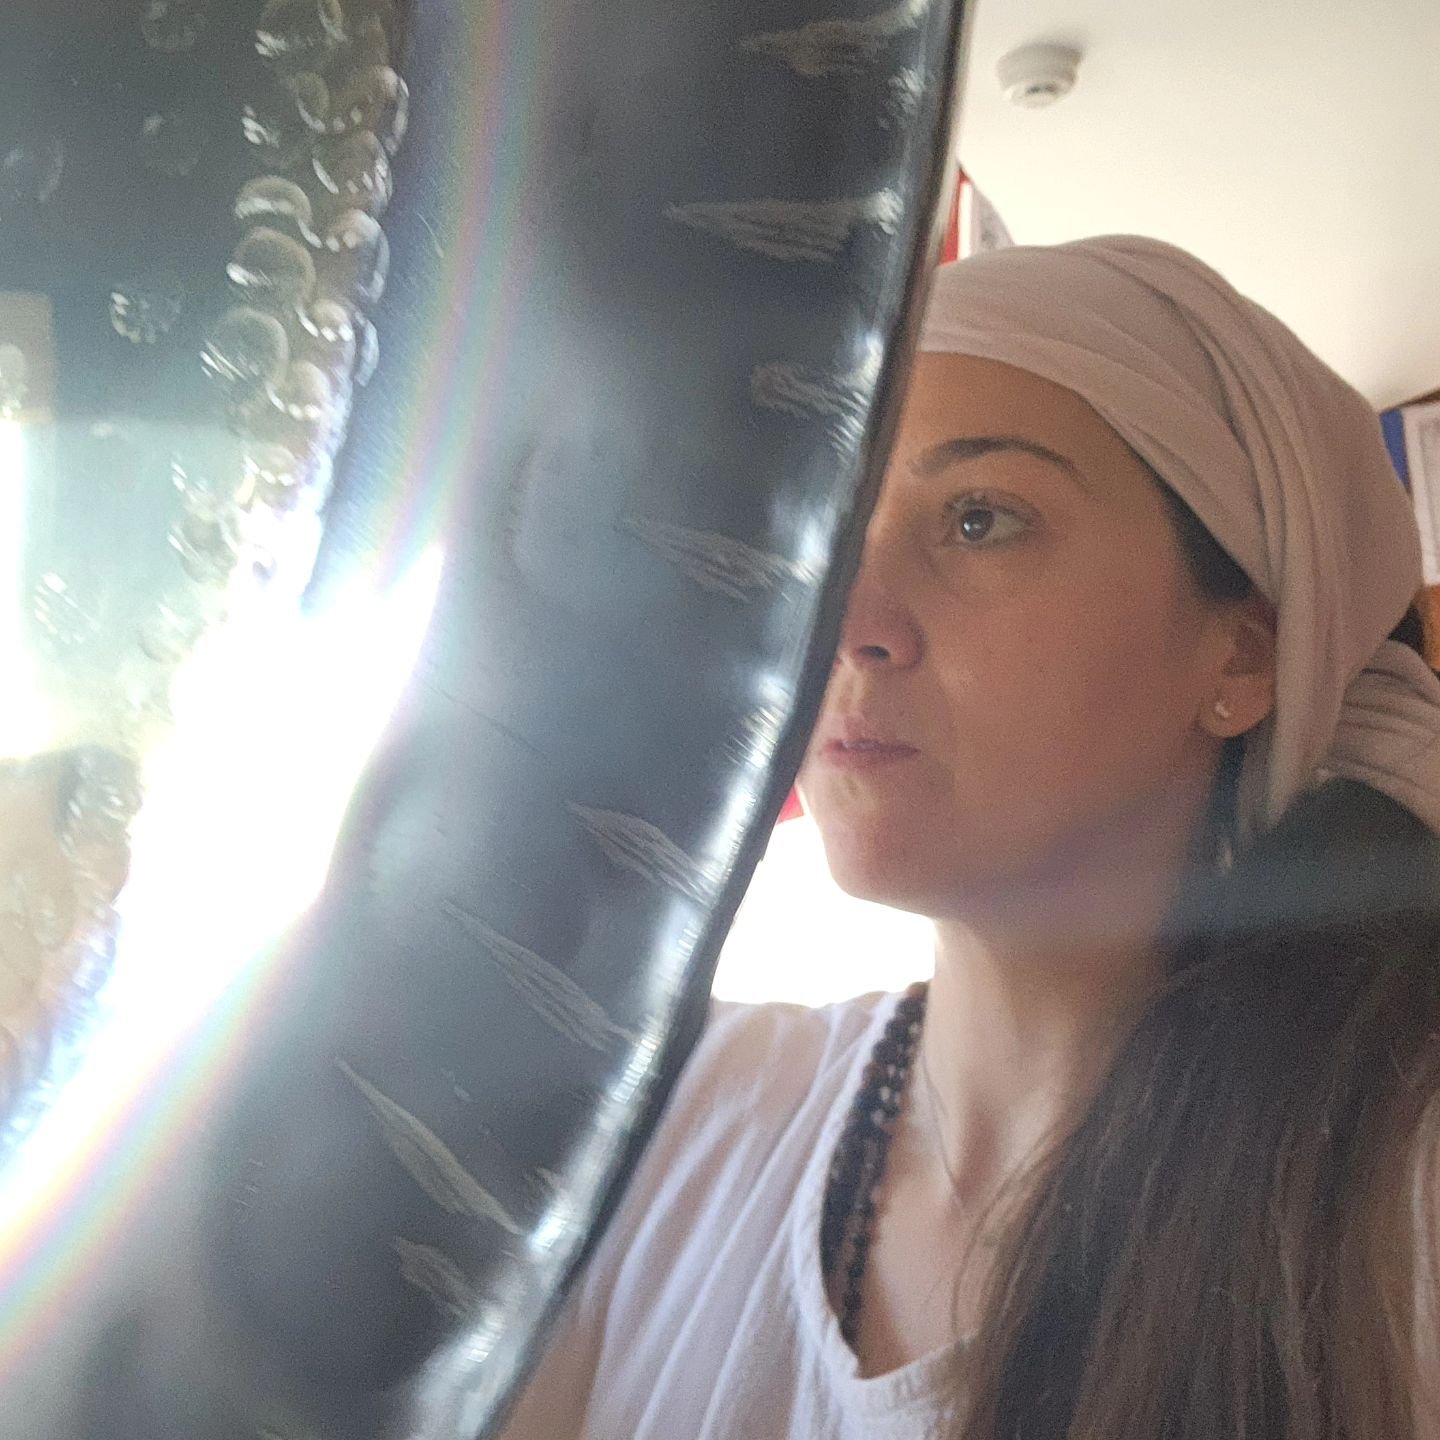 Me and my original, the 30-inch Paiste Symphonic gong, my &quot;OG&quot; that started it all and catapulted me onto my path of light - healing those near and far through the power of sound vibrations. 🥰

I am truly blessed to have began my spiritual